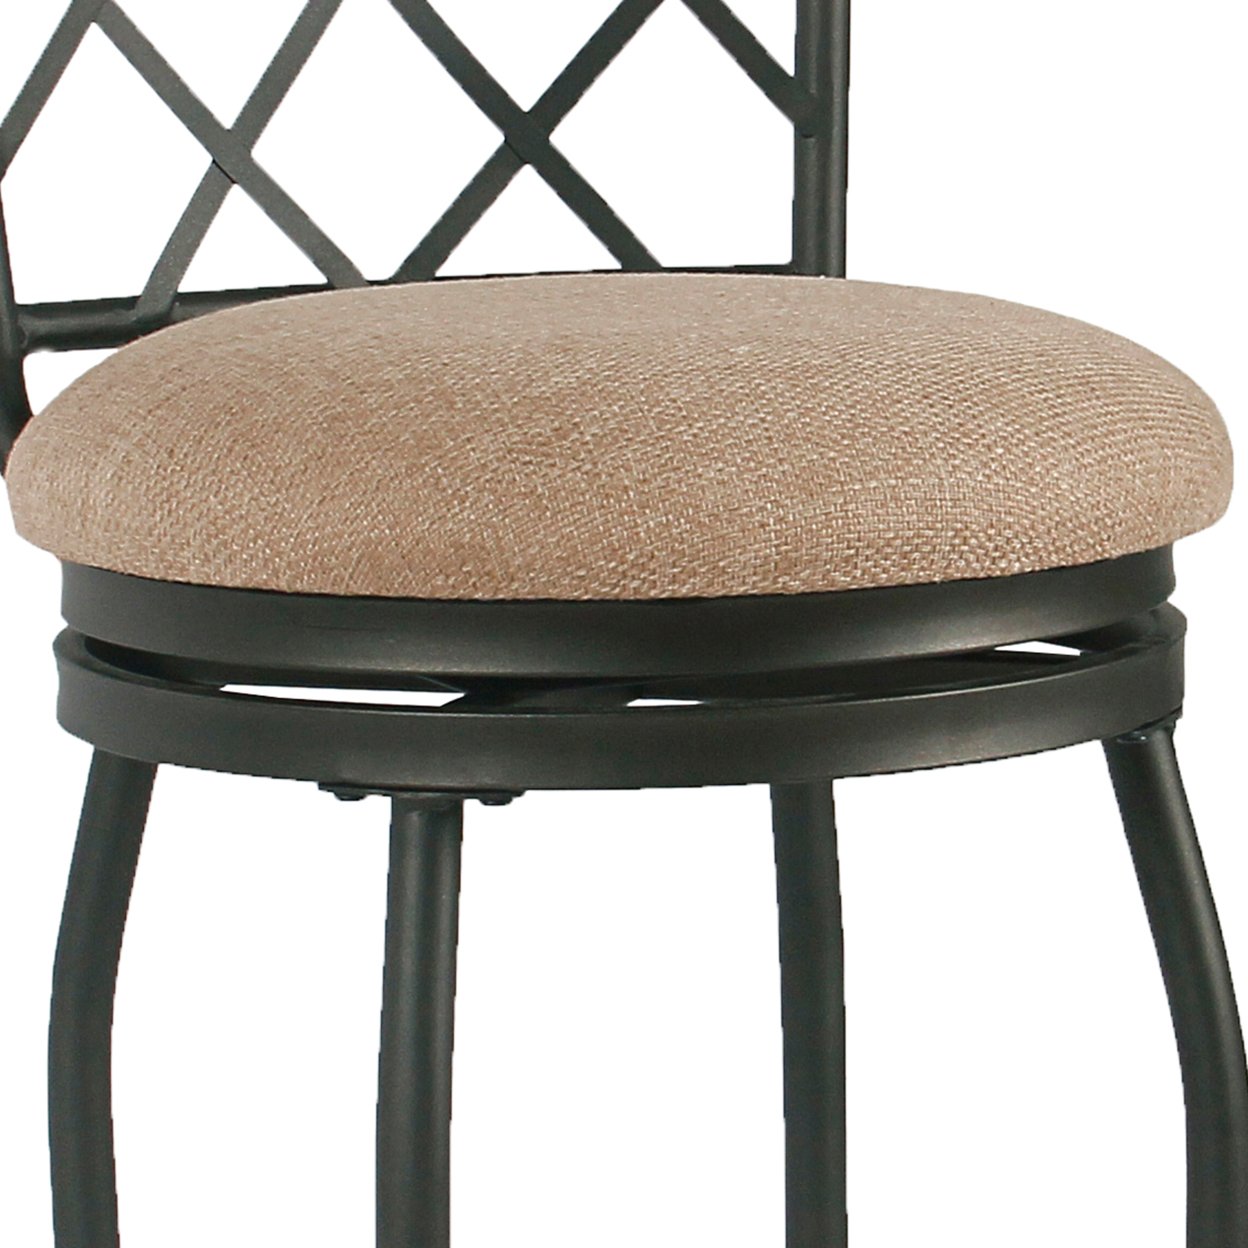 Metal Framed Counter Stool With Fabric Upholstered Seat And Designer Back, Beige And Black- Saltoro Sherpi